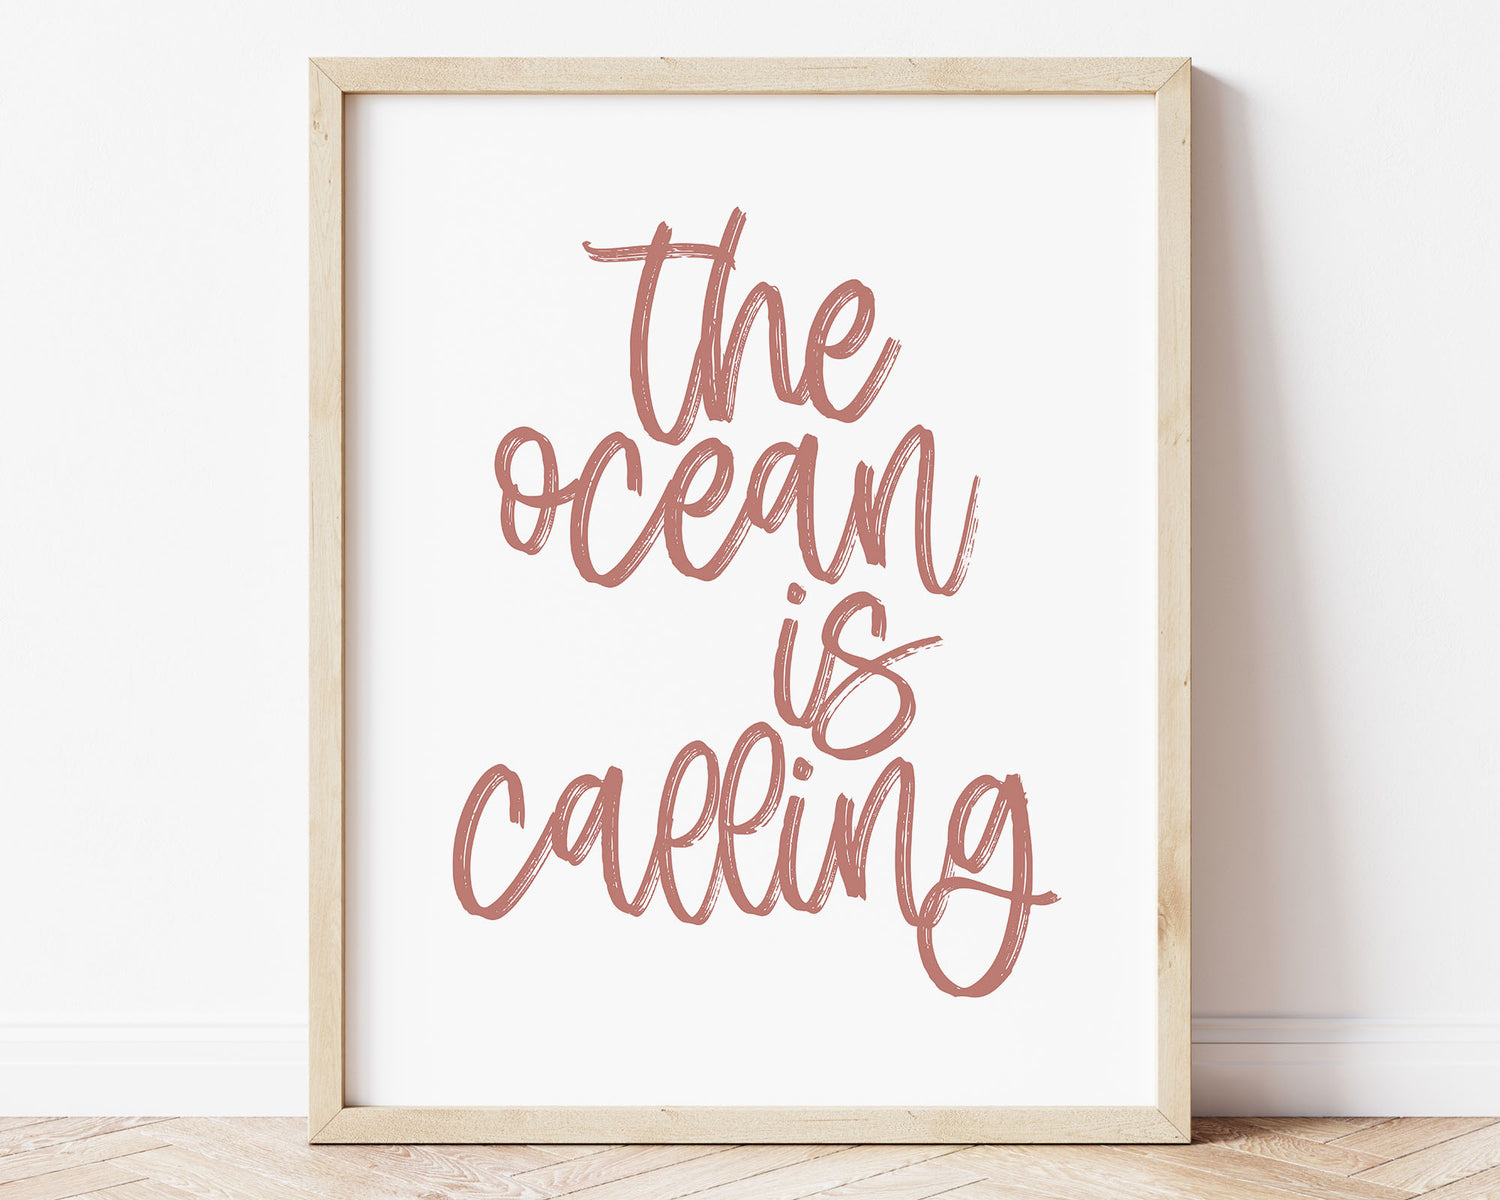 Dusty Rose The Ocean Is Calling Printable Wall Art featuring a textured brush style cursive lettered quote perfect for Baby Girl Nautical Nursery Decor, Baby Girl Surf Nursery Wall Art, Nautical Kids Bedroom Decor or Children's Coastal Wall Art.